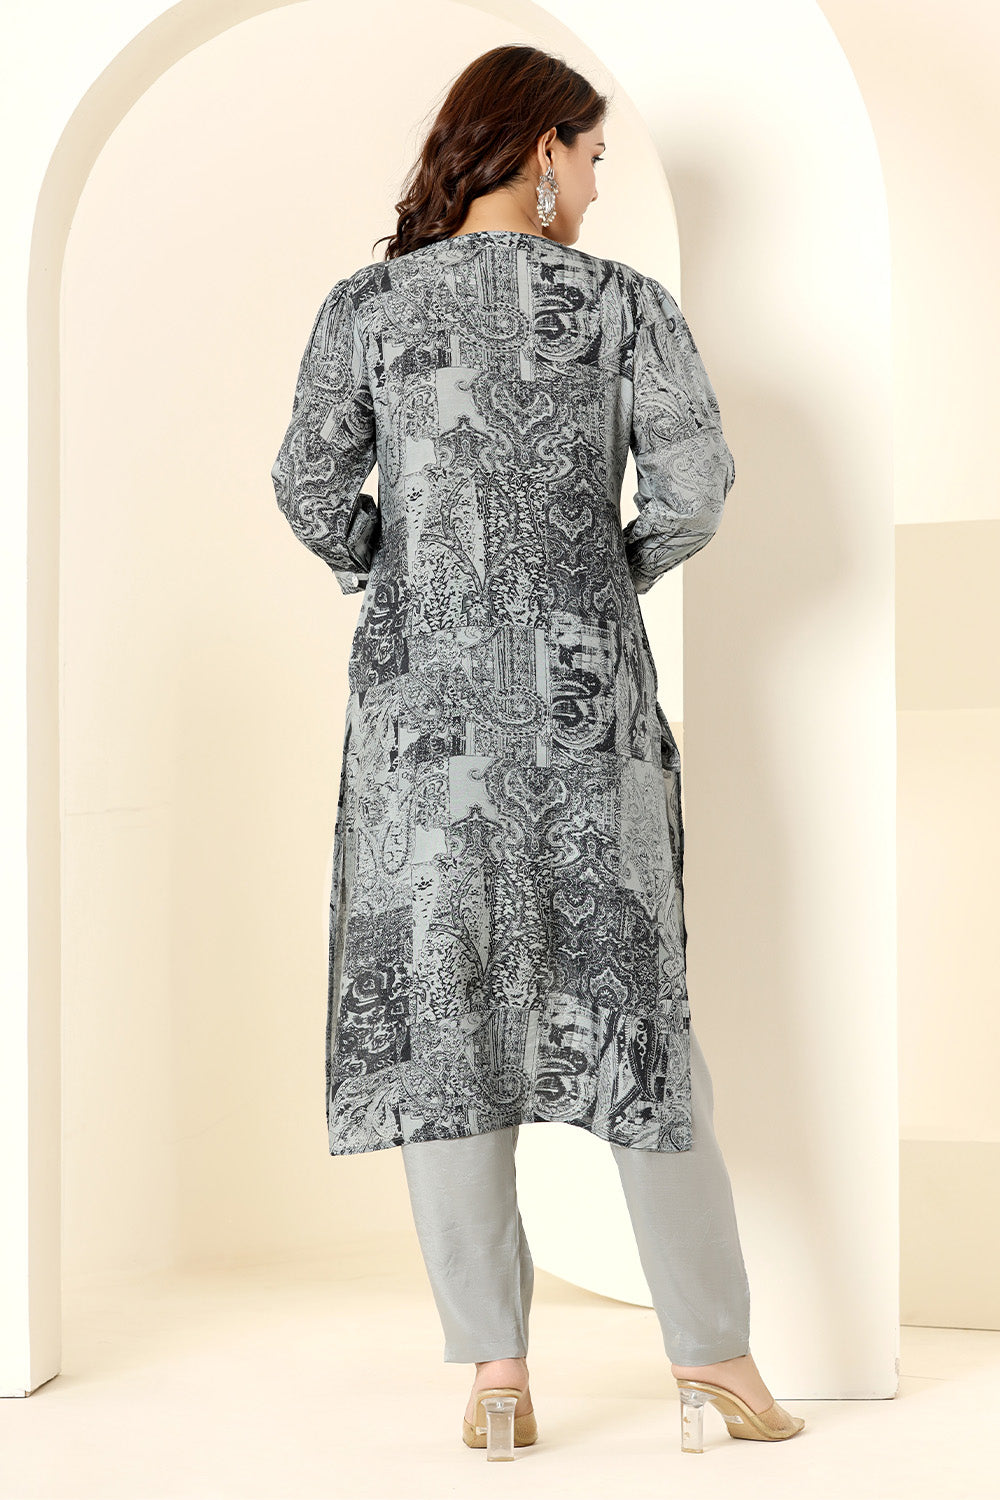 Grey Color Muslin Printed Straight Suit